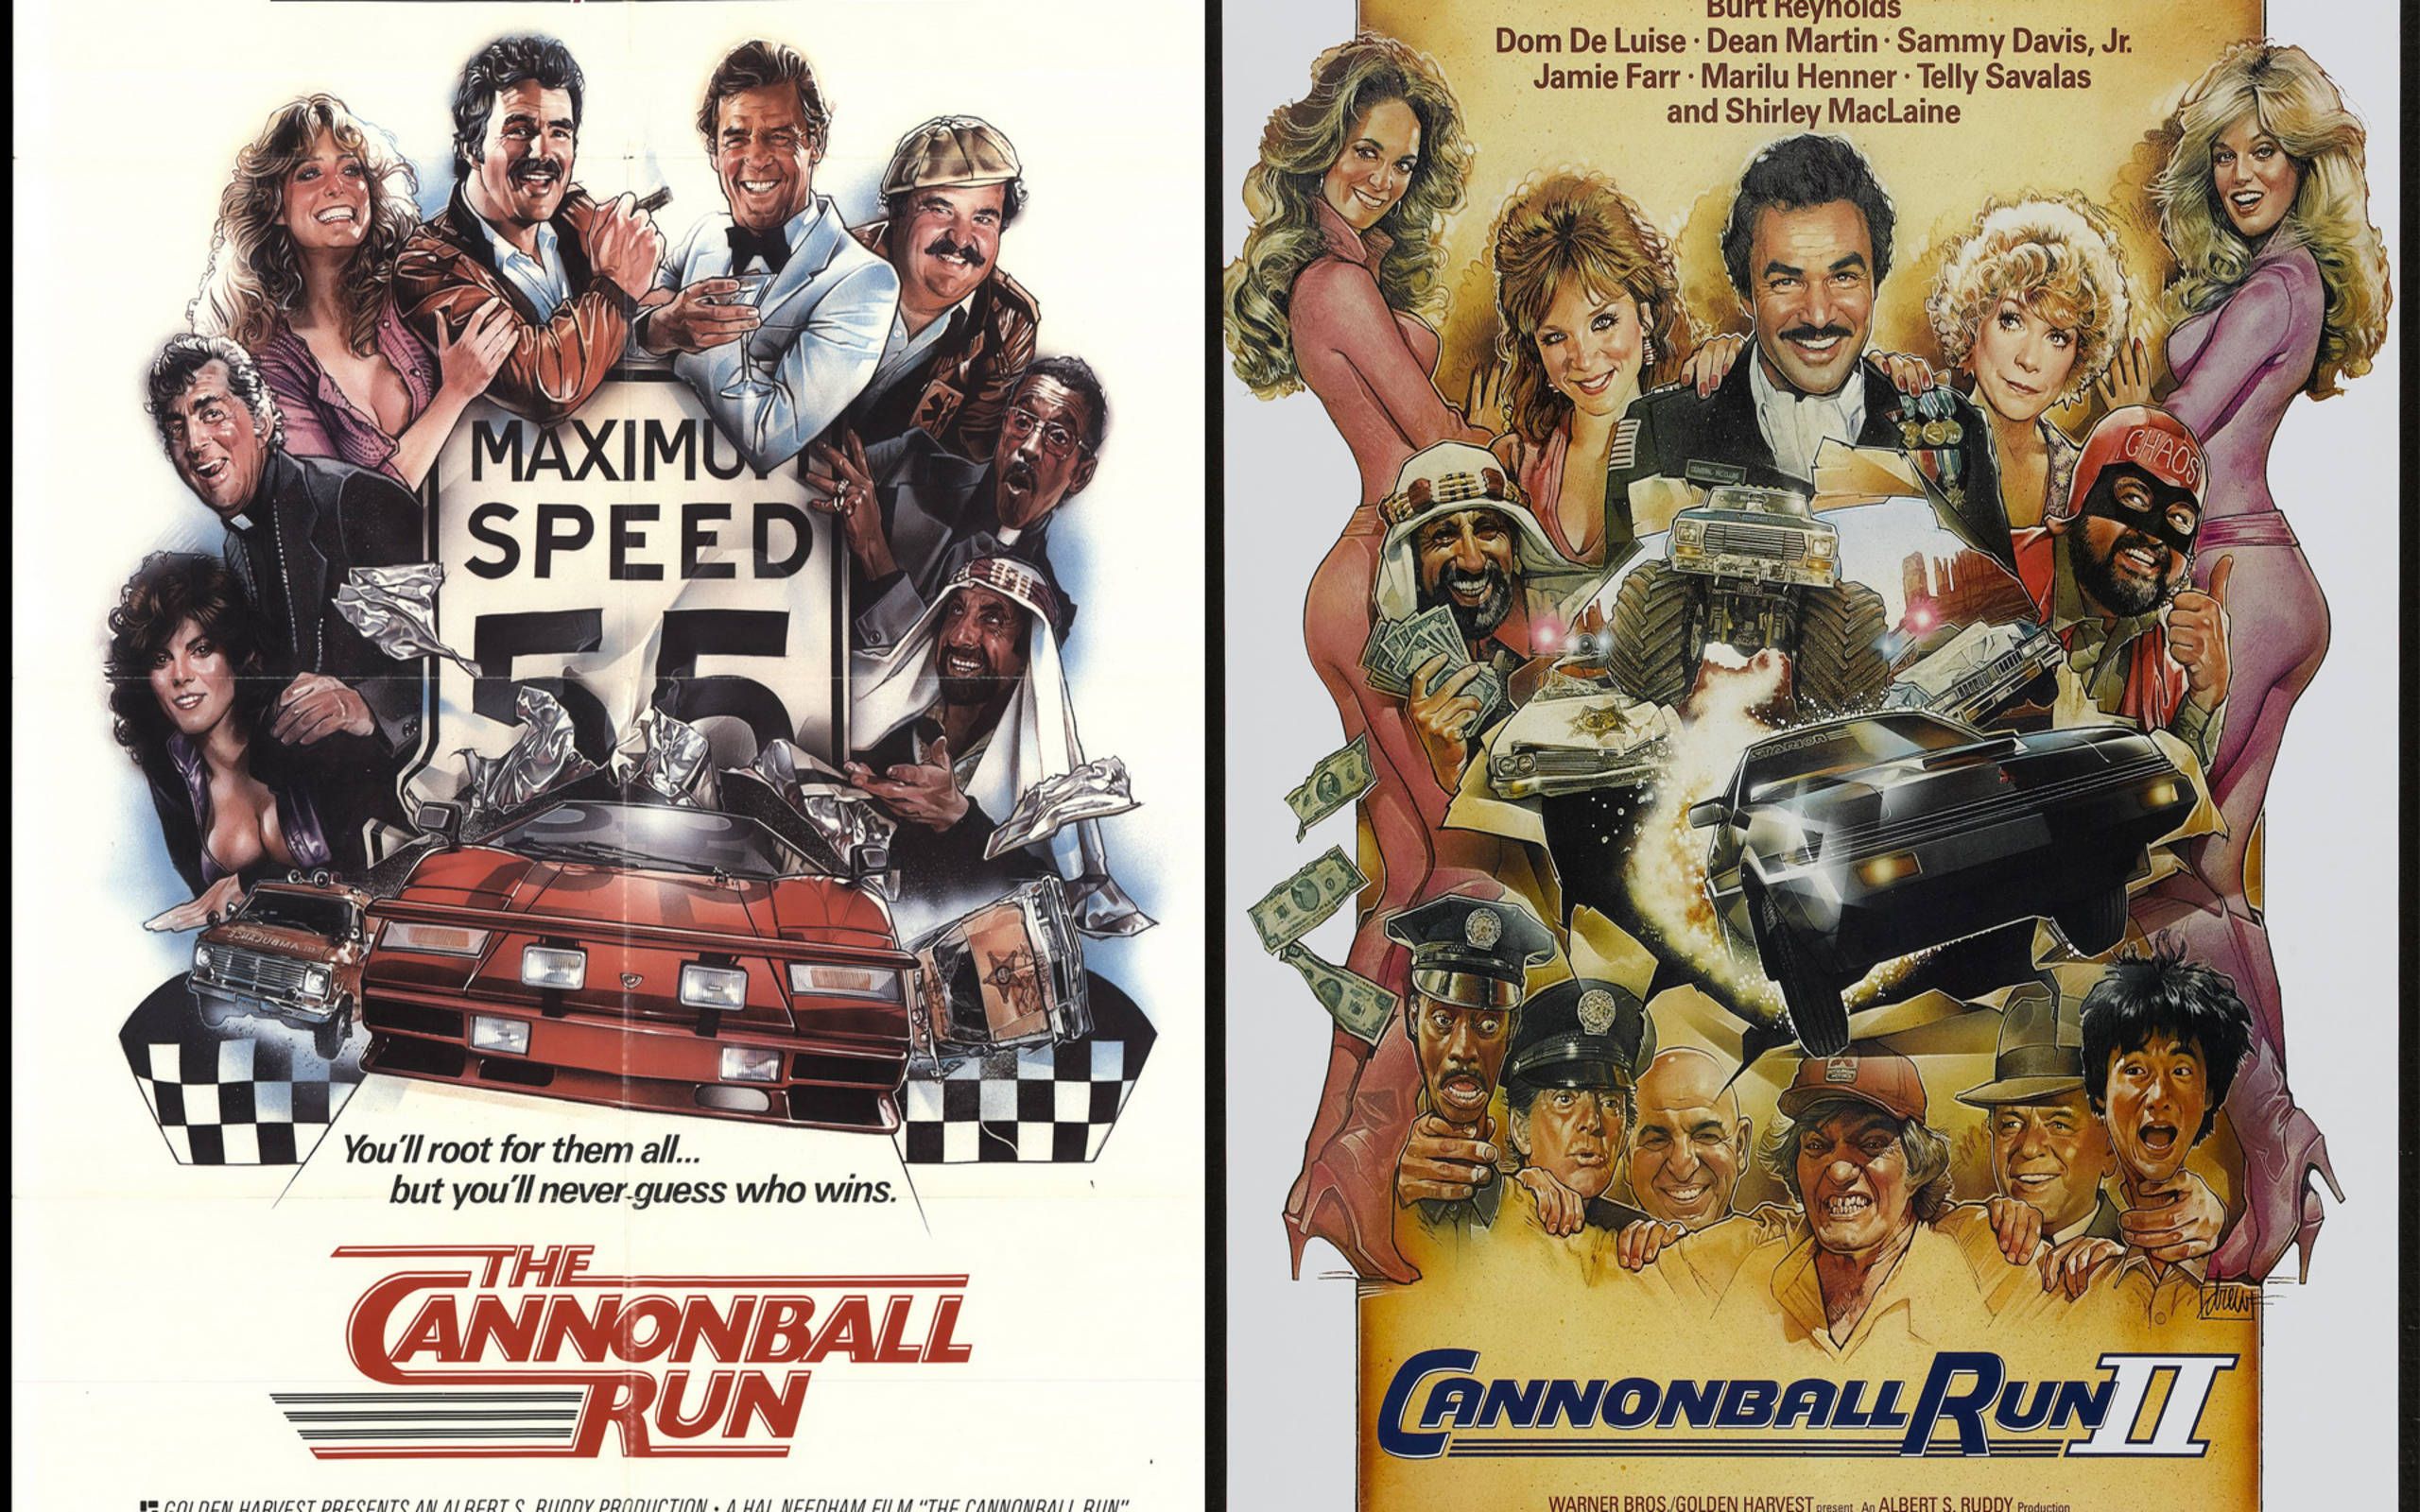 Warner Bros Set To Relaunch 'Cannonball Run' Movie Franchise